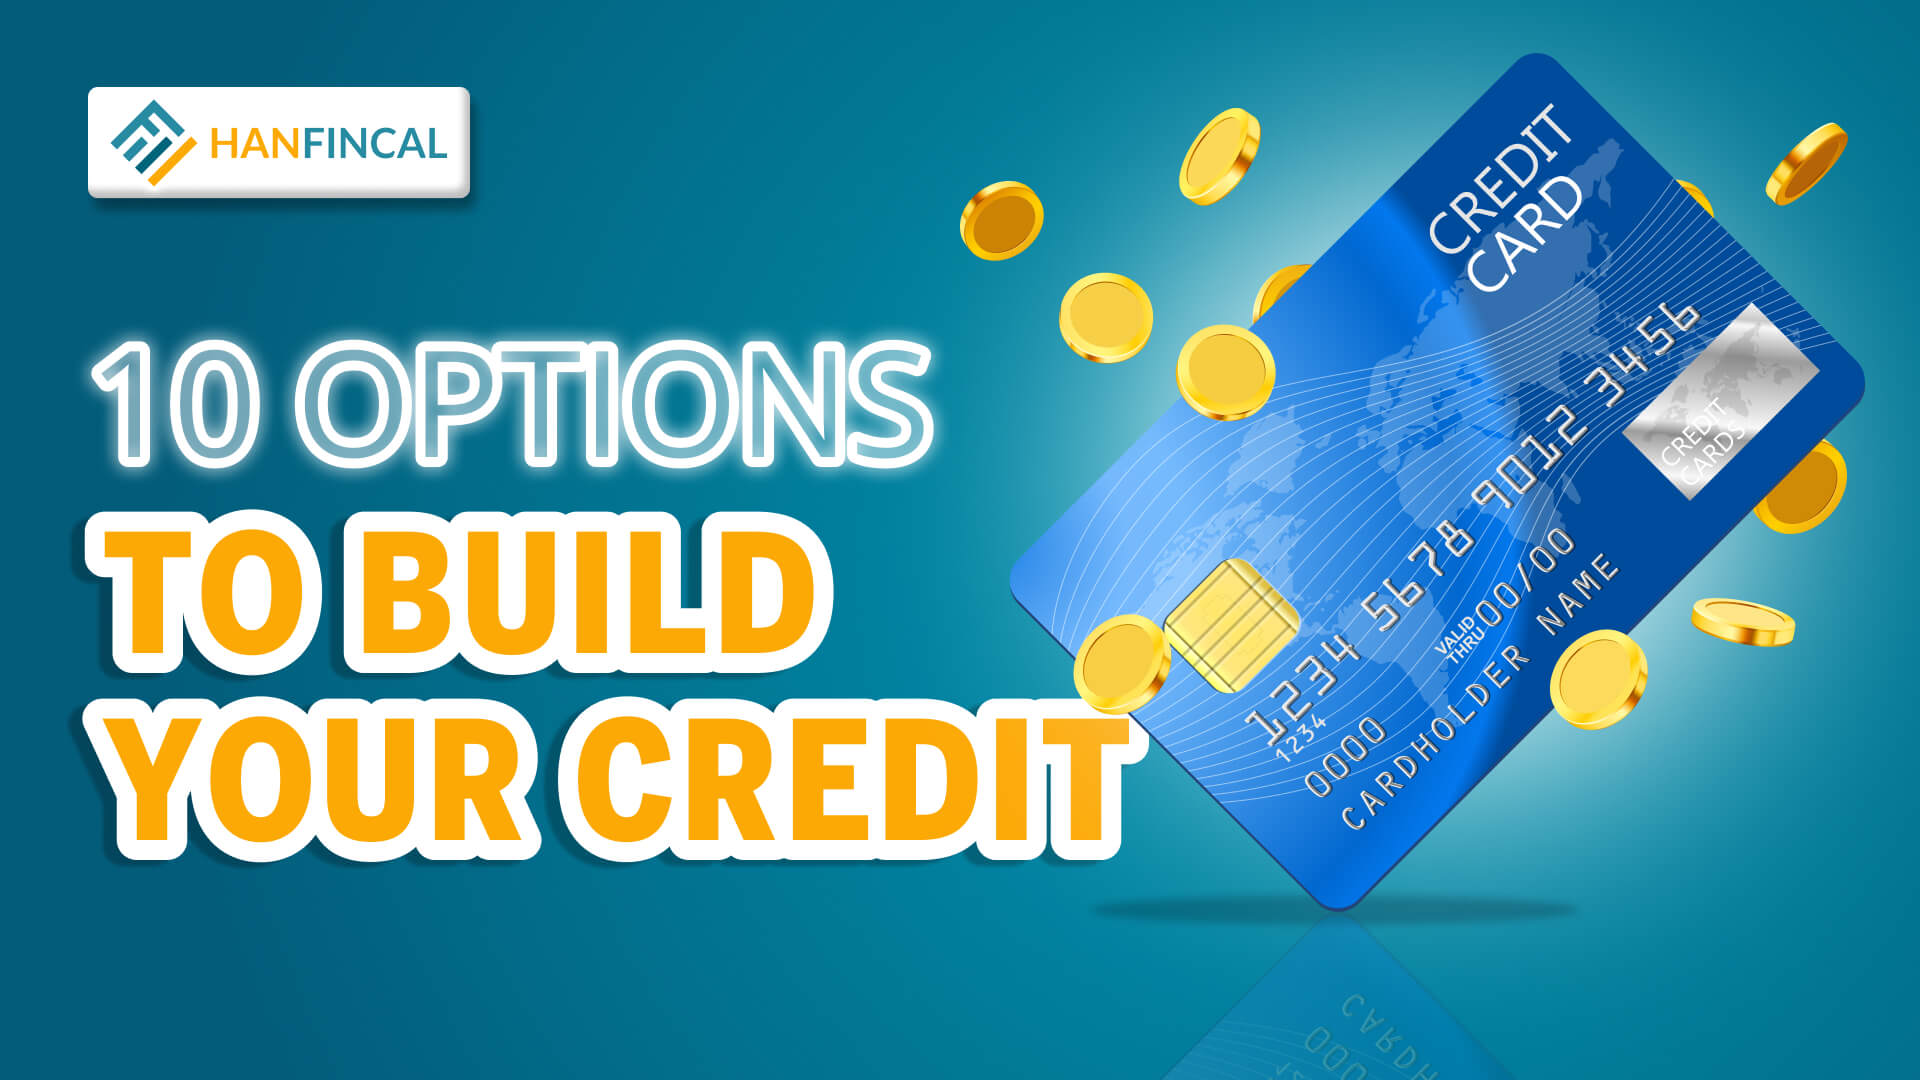 How To Build Credit?